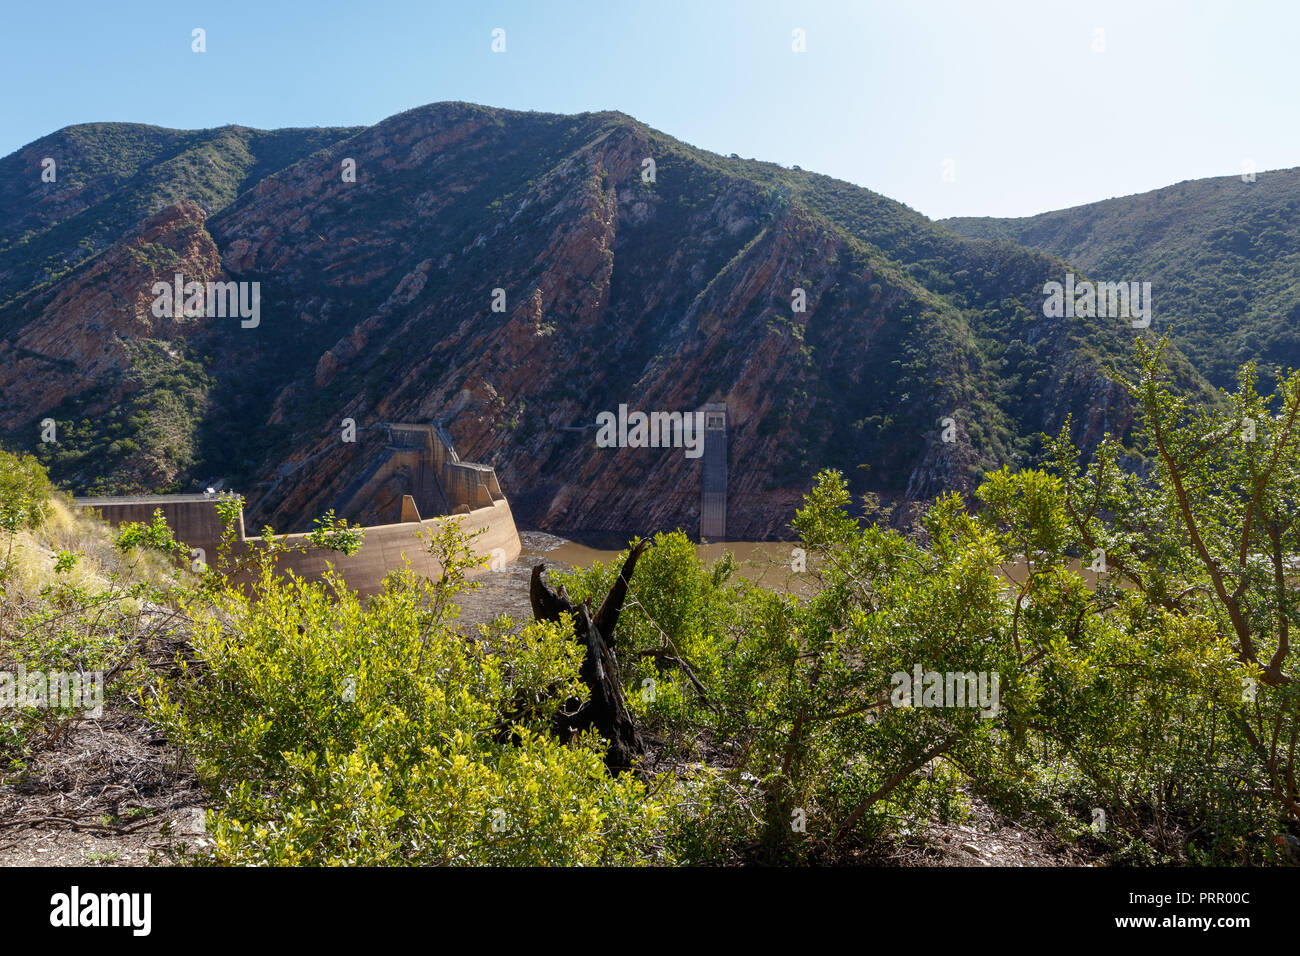 The view of the dam with bushes and mountains in the background Stock Photo